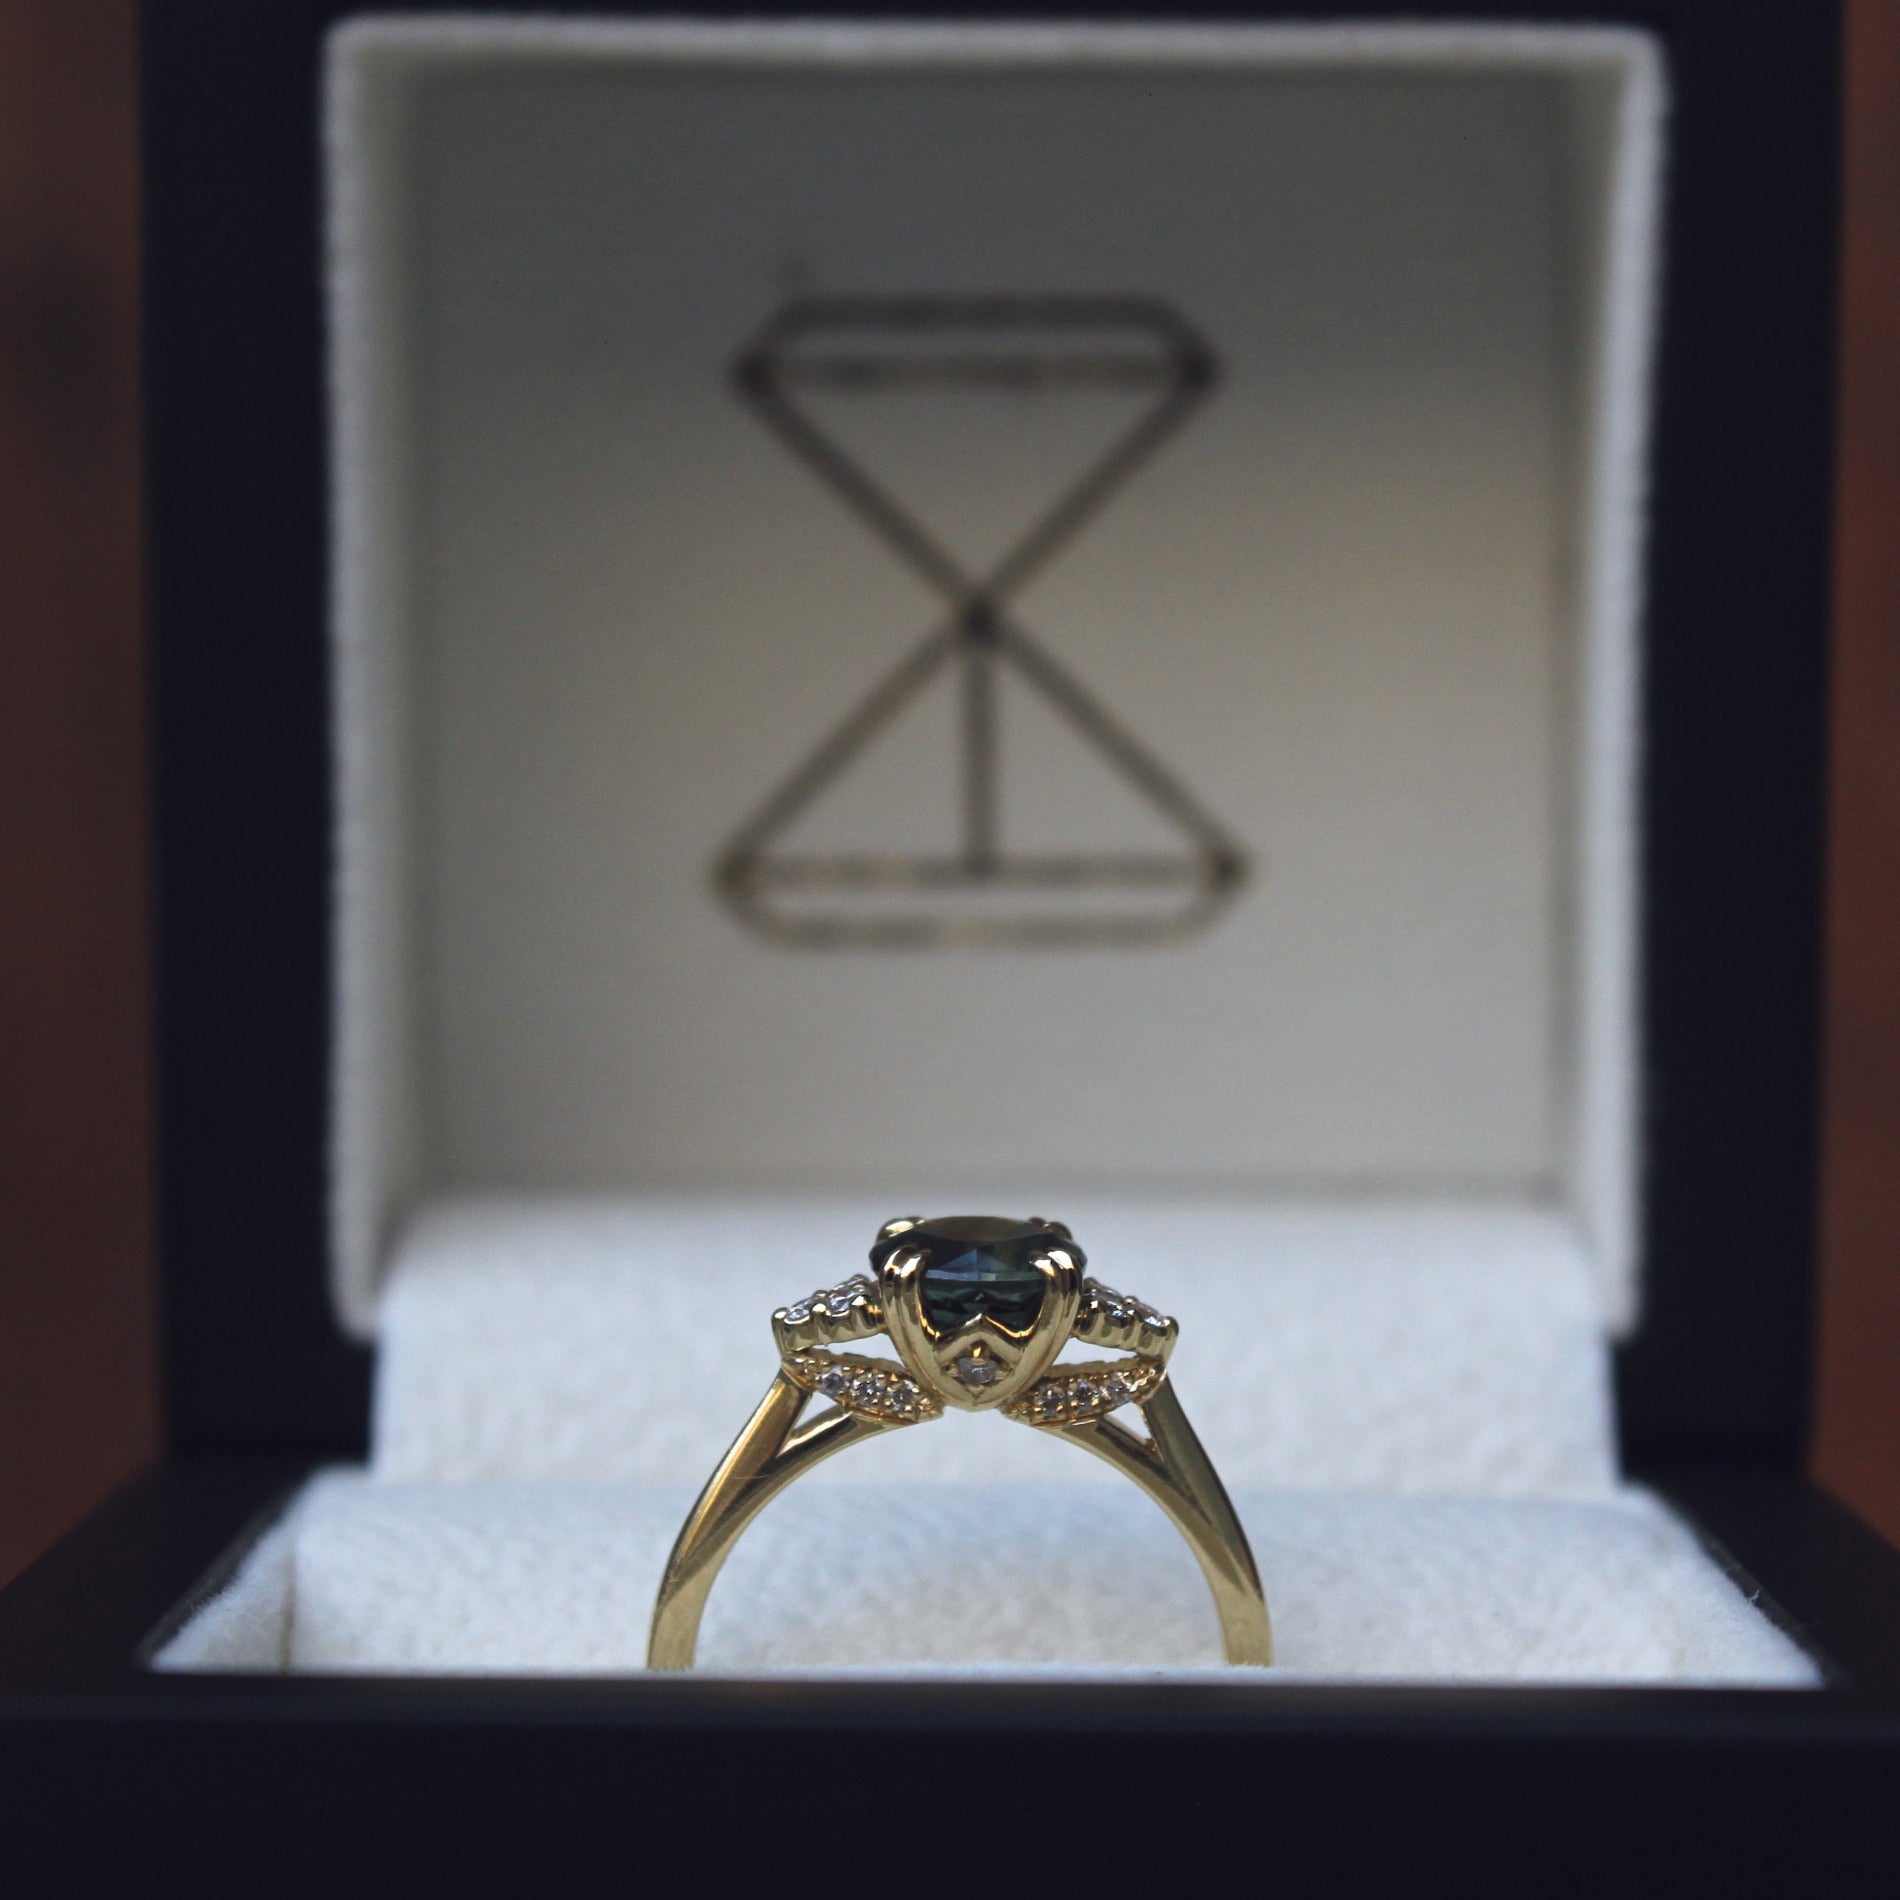 Moira Patience Fine Jewellery Bespoke Commission Teal Sapphire and Diamond Engagement Ring in Edinburgh